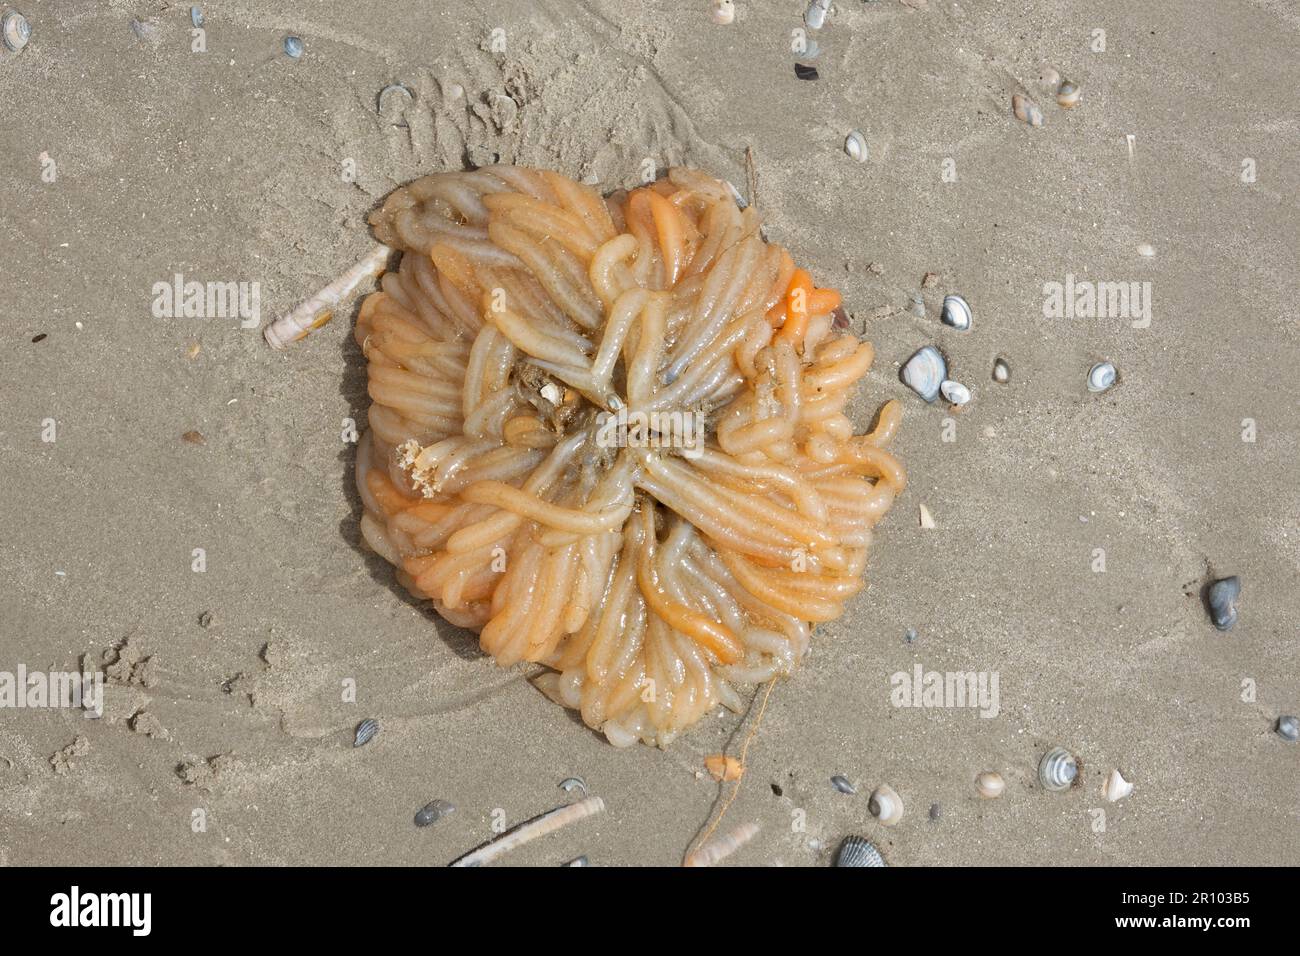 Bunch of gelatinous tubes containing eggs of Eurpean squid, washed up on the beach Stock Photo